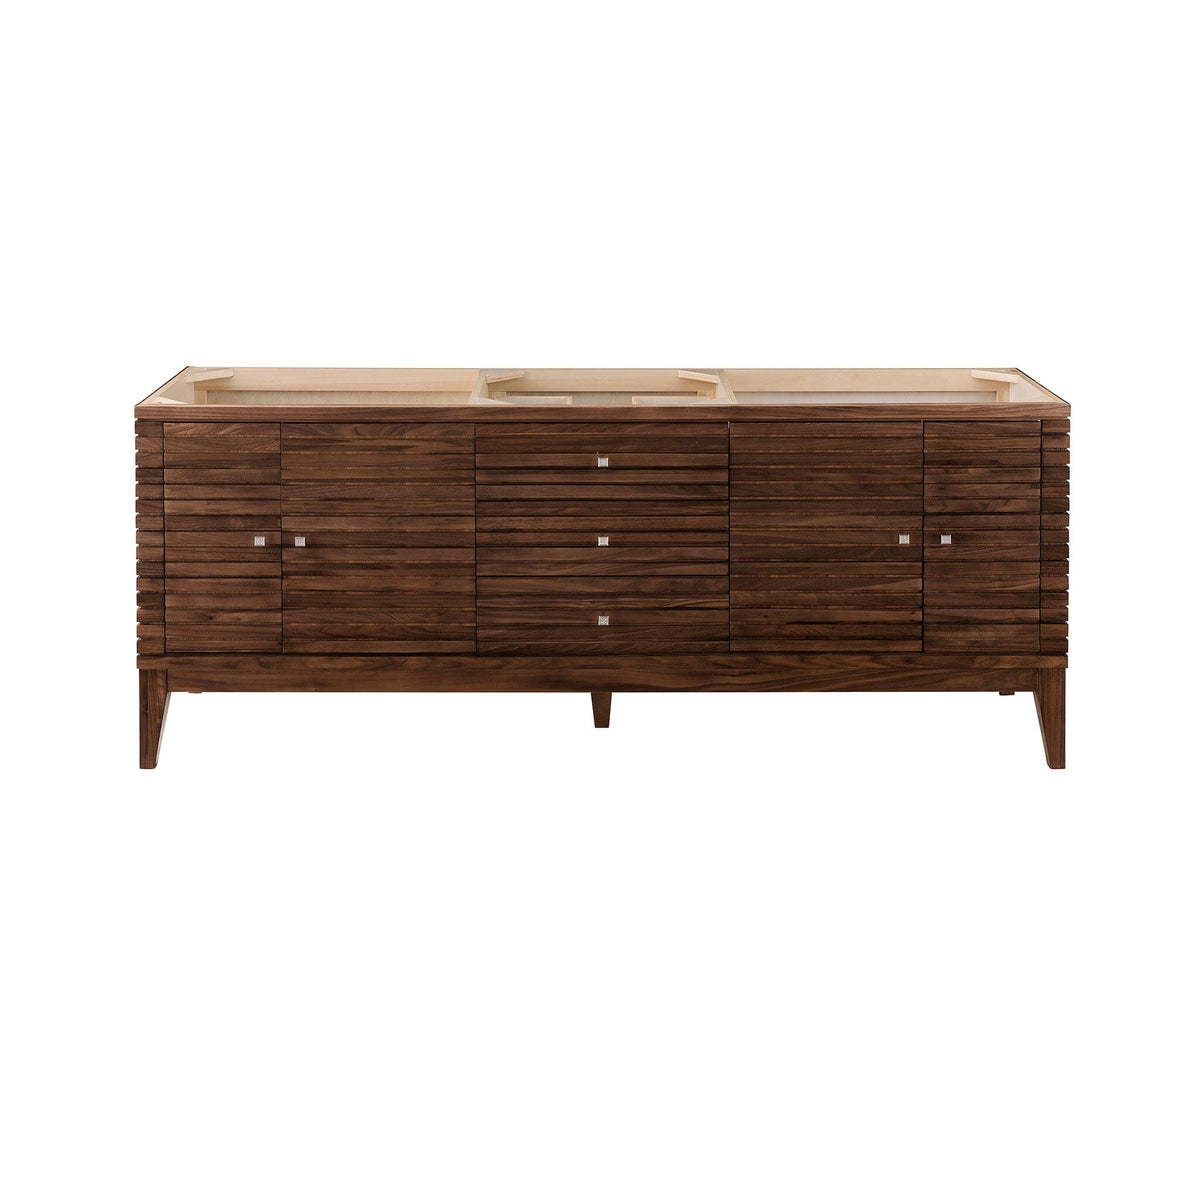 72" Linear Single Bathroom Vanity, Mid-Century Walnut with Glossy White Composite Top